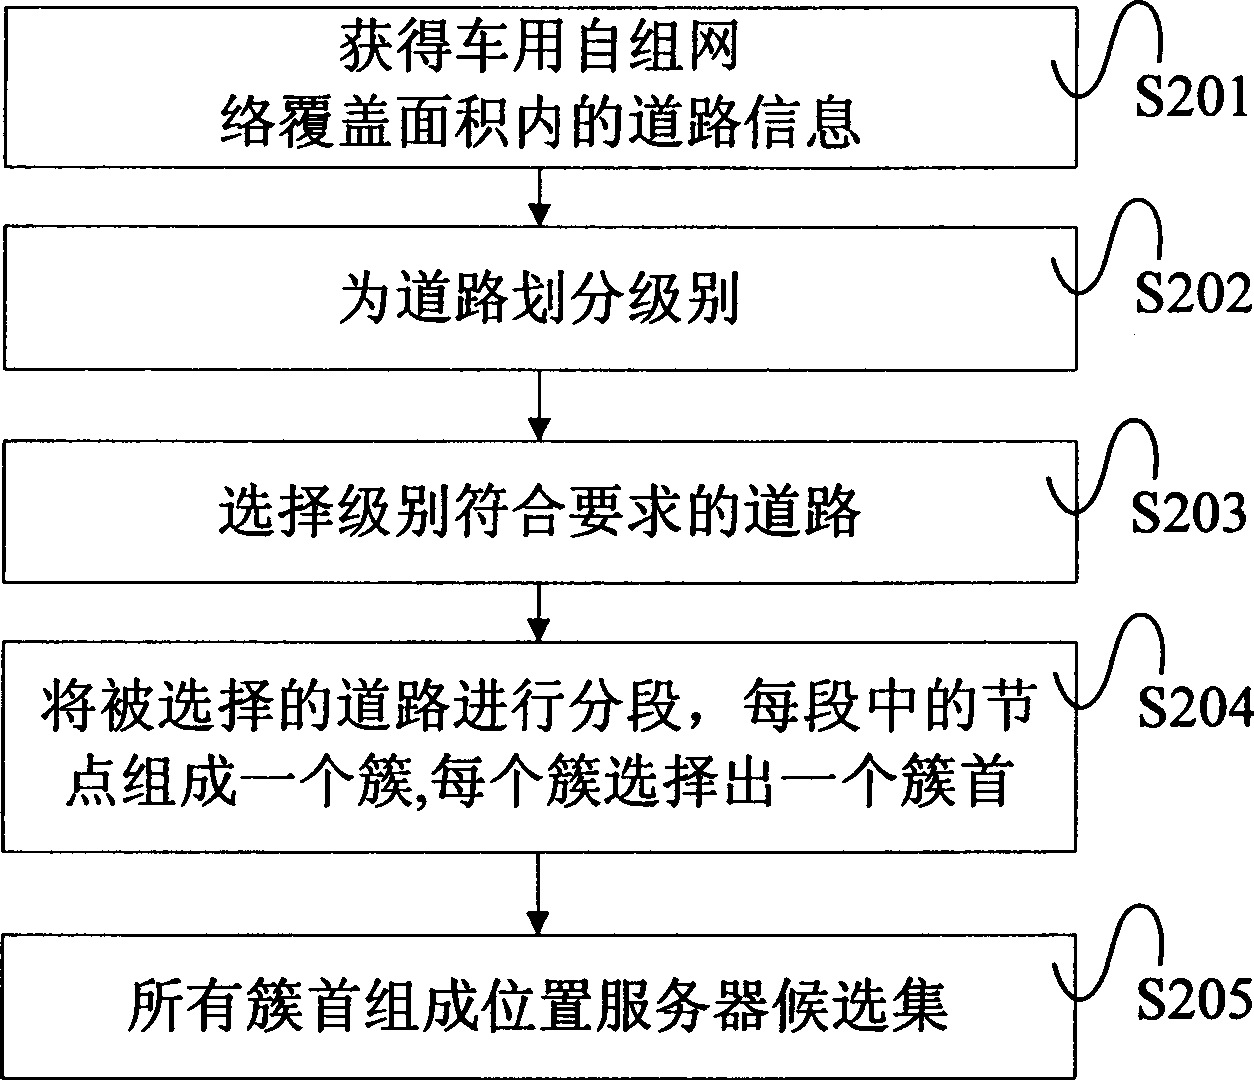 Method and system determining communication destination node position in automobile self-organized network